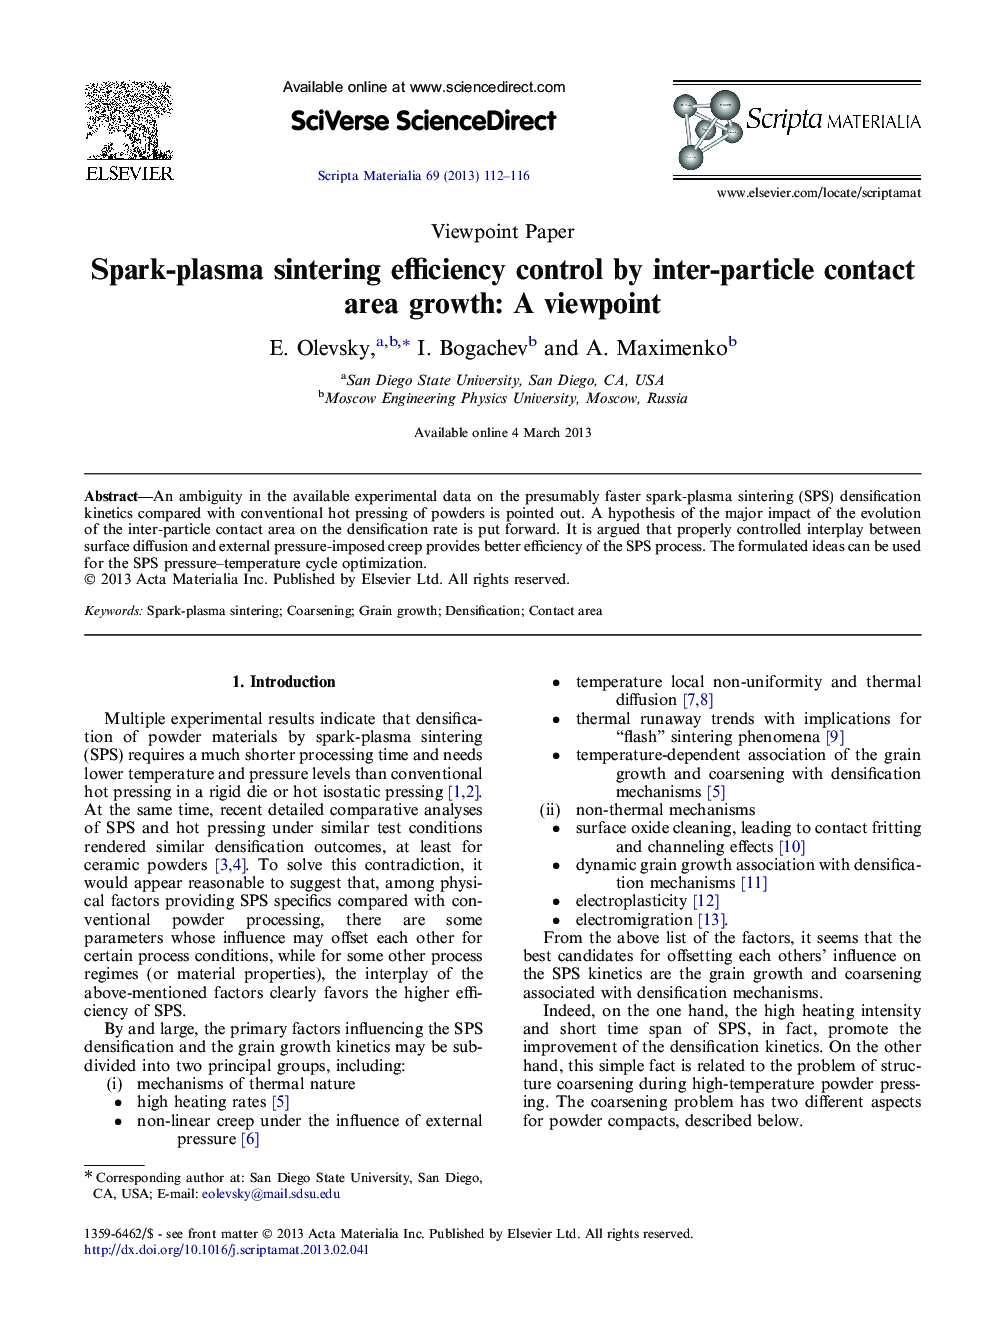 Spark-plasma sintering efficiency control by inter-particle contact area growth: A viewpoint